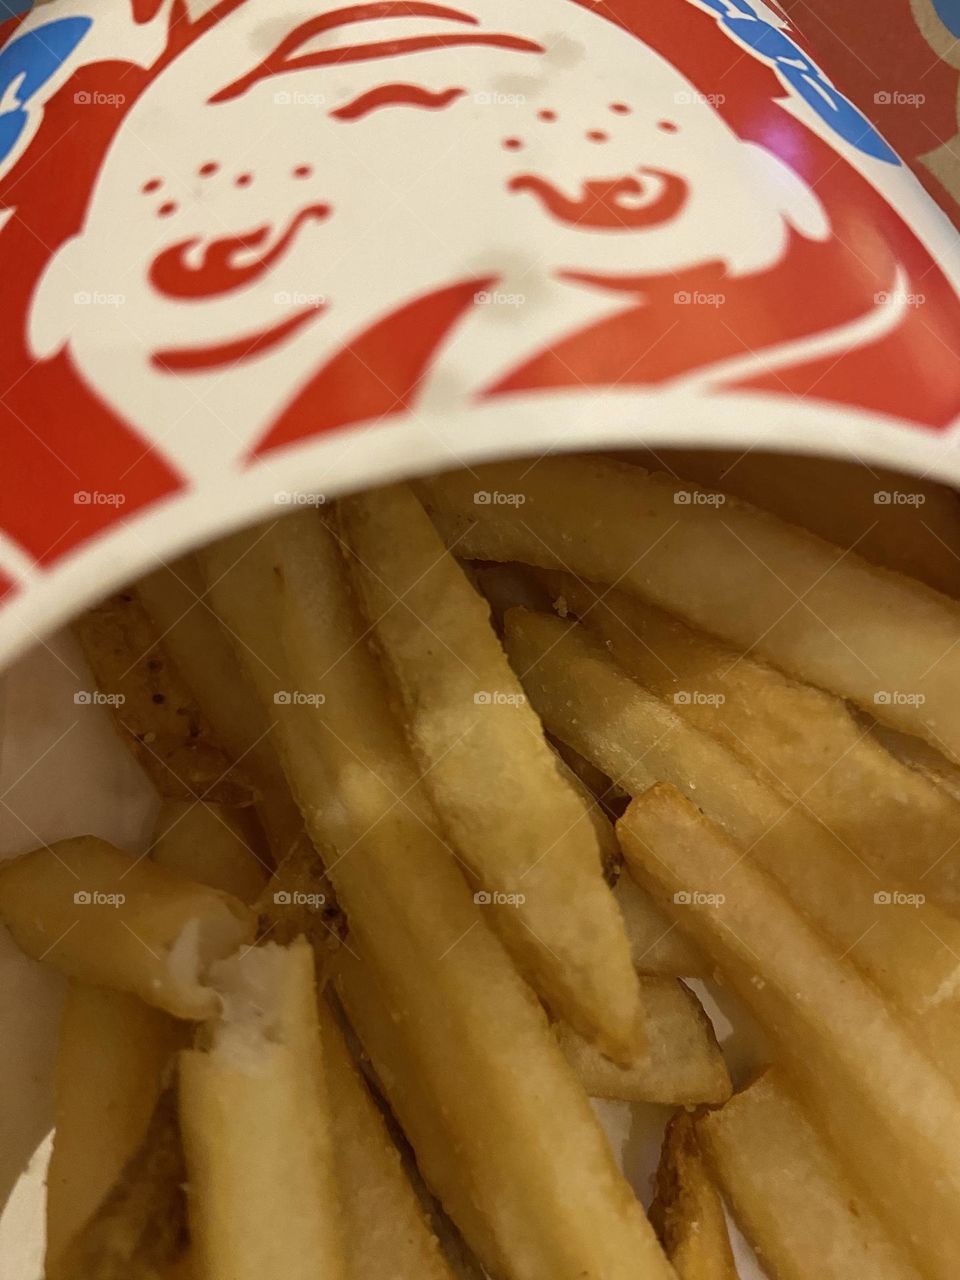 Crispy golden brown french fries from Wendy’s. A rare oh-so-good treat on a Friday night. 